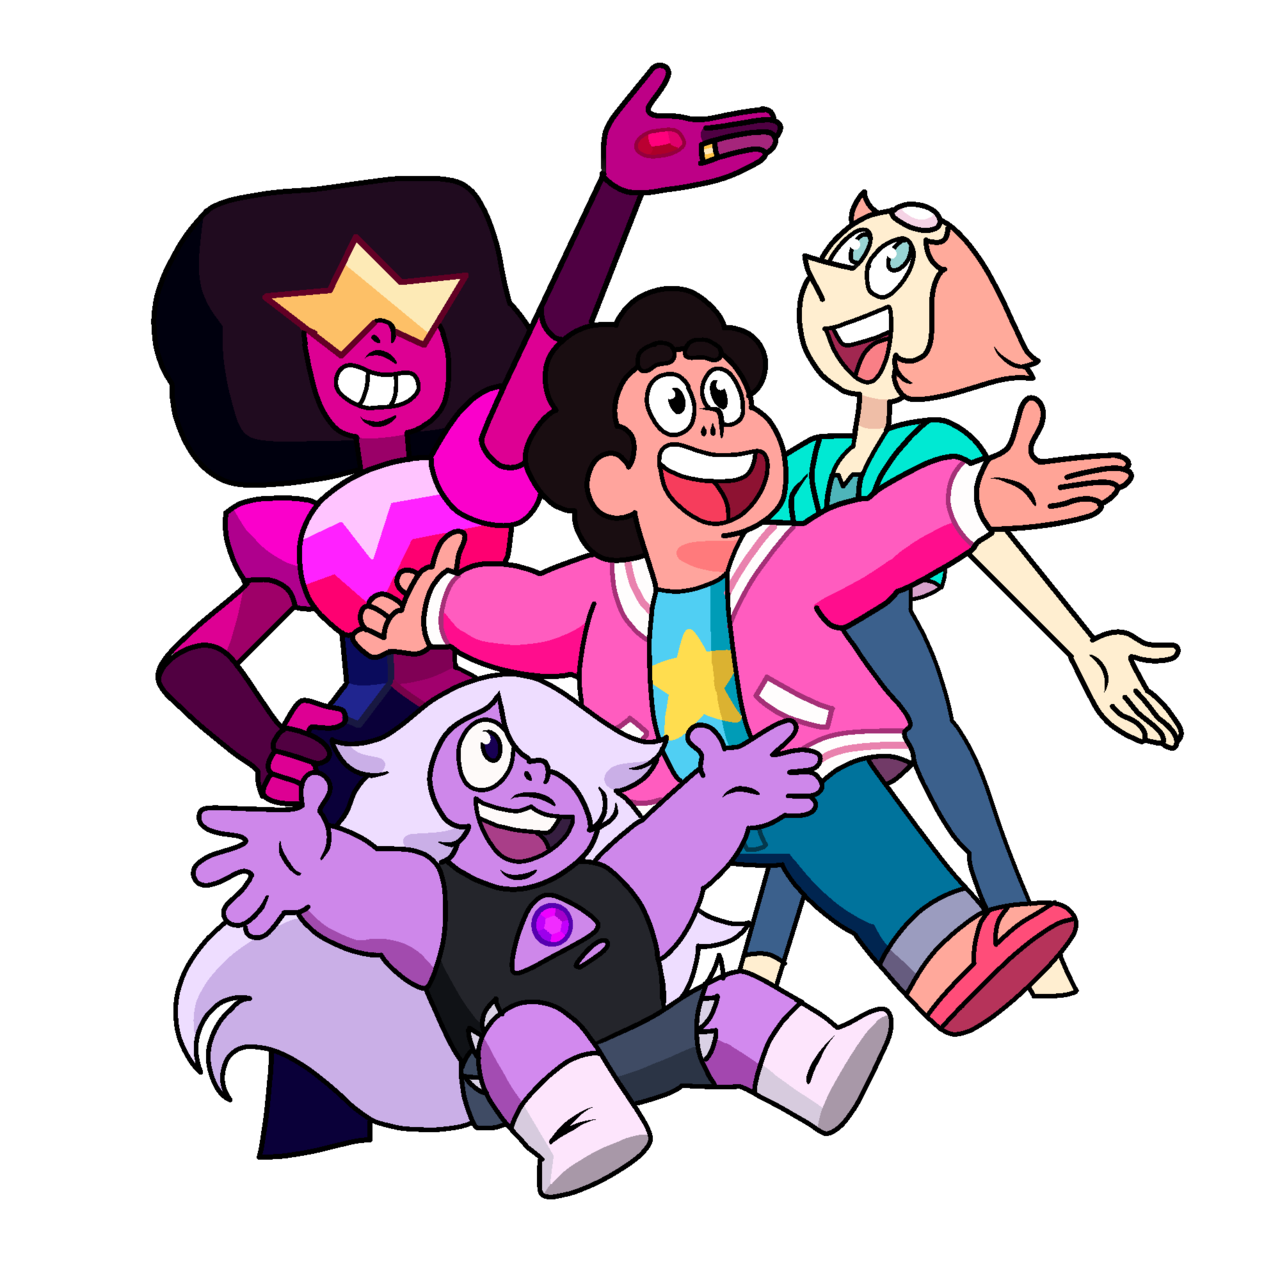 Steven Universe: The Movie who’s excited?